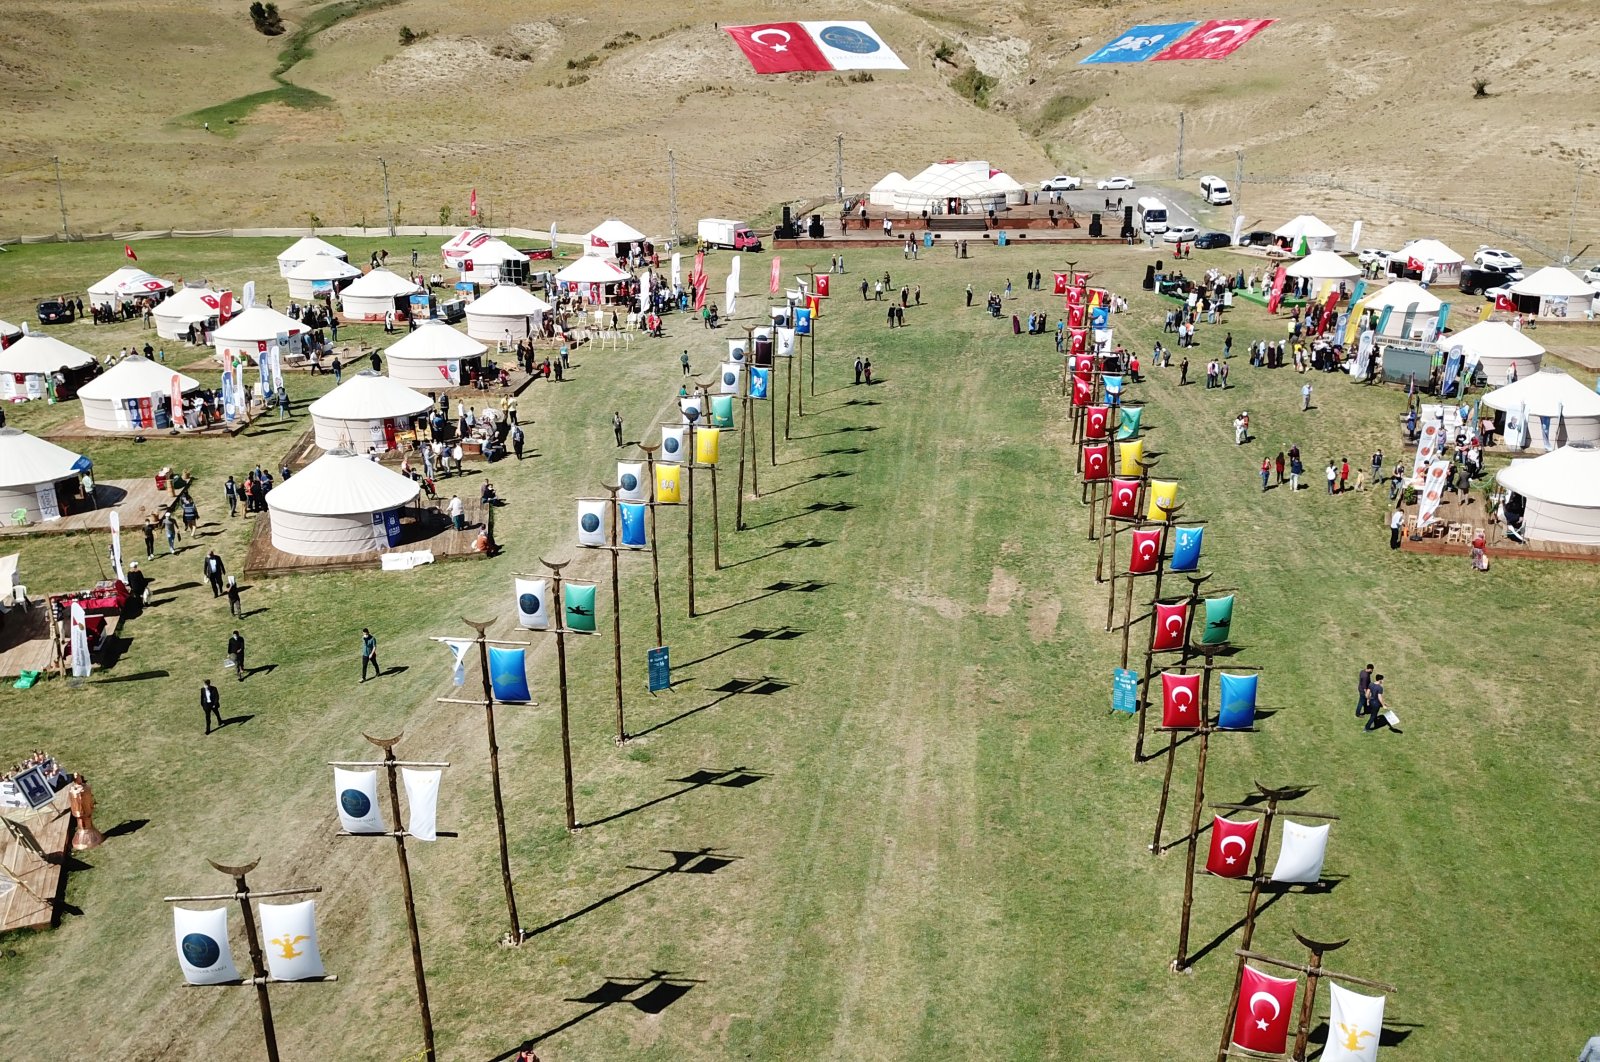 A view of yurts set up in Ahlat district where Sultan Alp Arslan camped before the battle, in Bitlis, eastern Turkey, Aug. 23, 2020. (AA Photo)